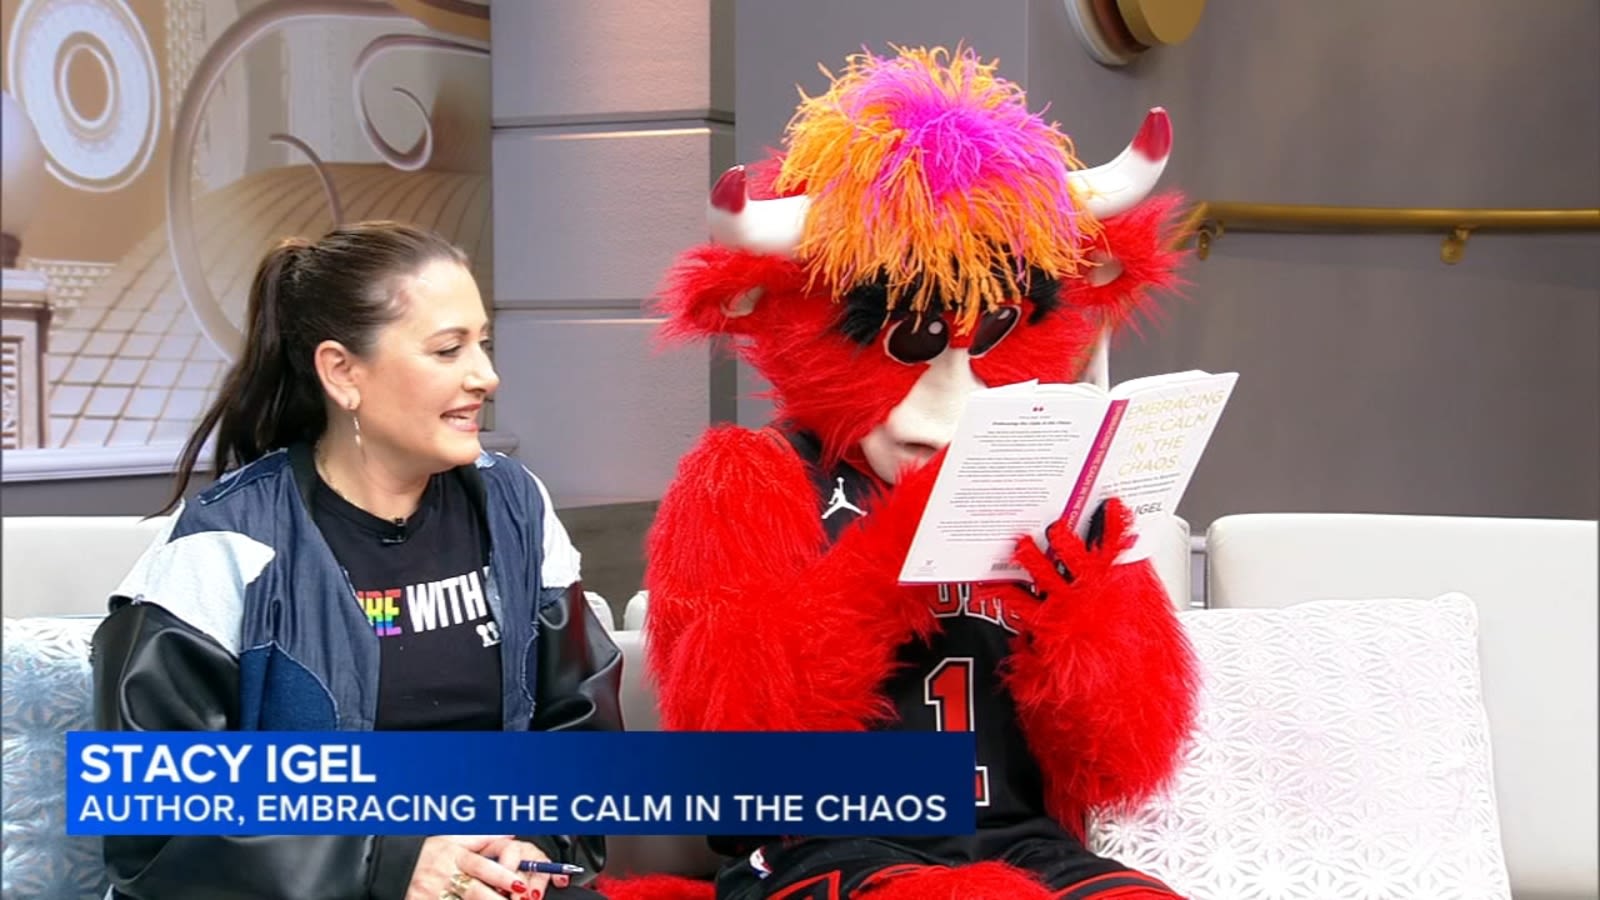 Watch Benny the Bull read a book on 'Embracing the Calm In the Chaos'